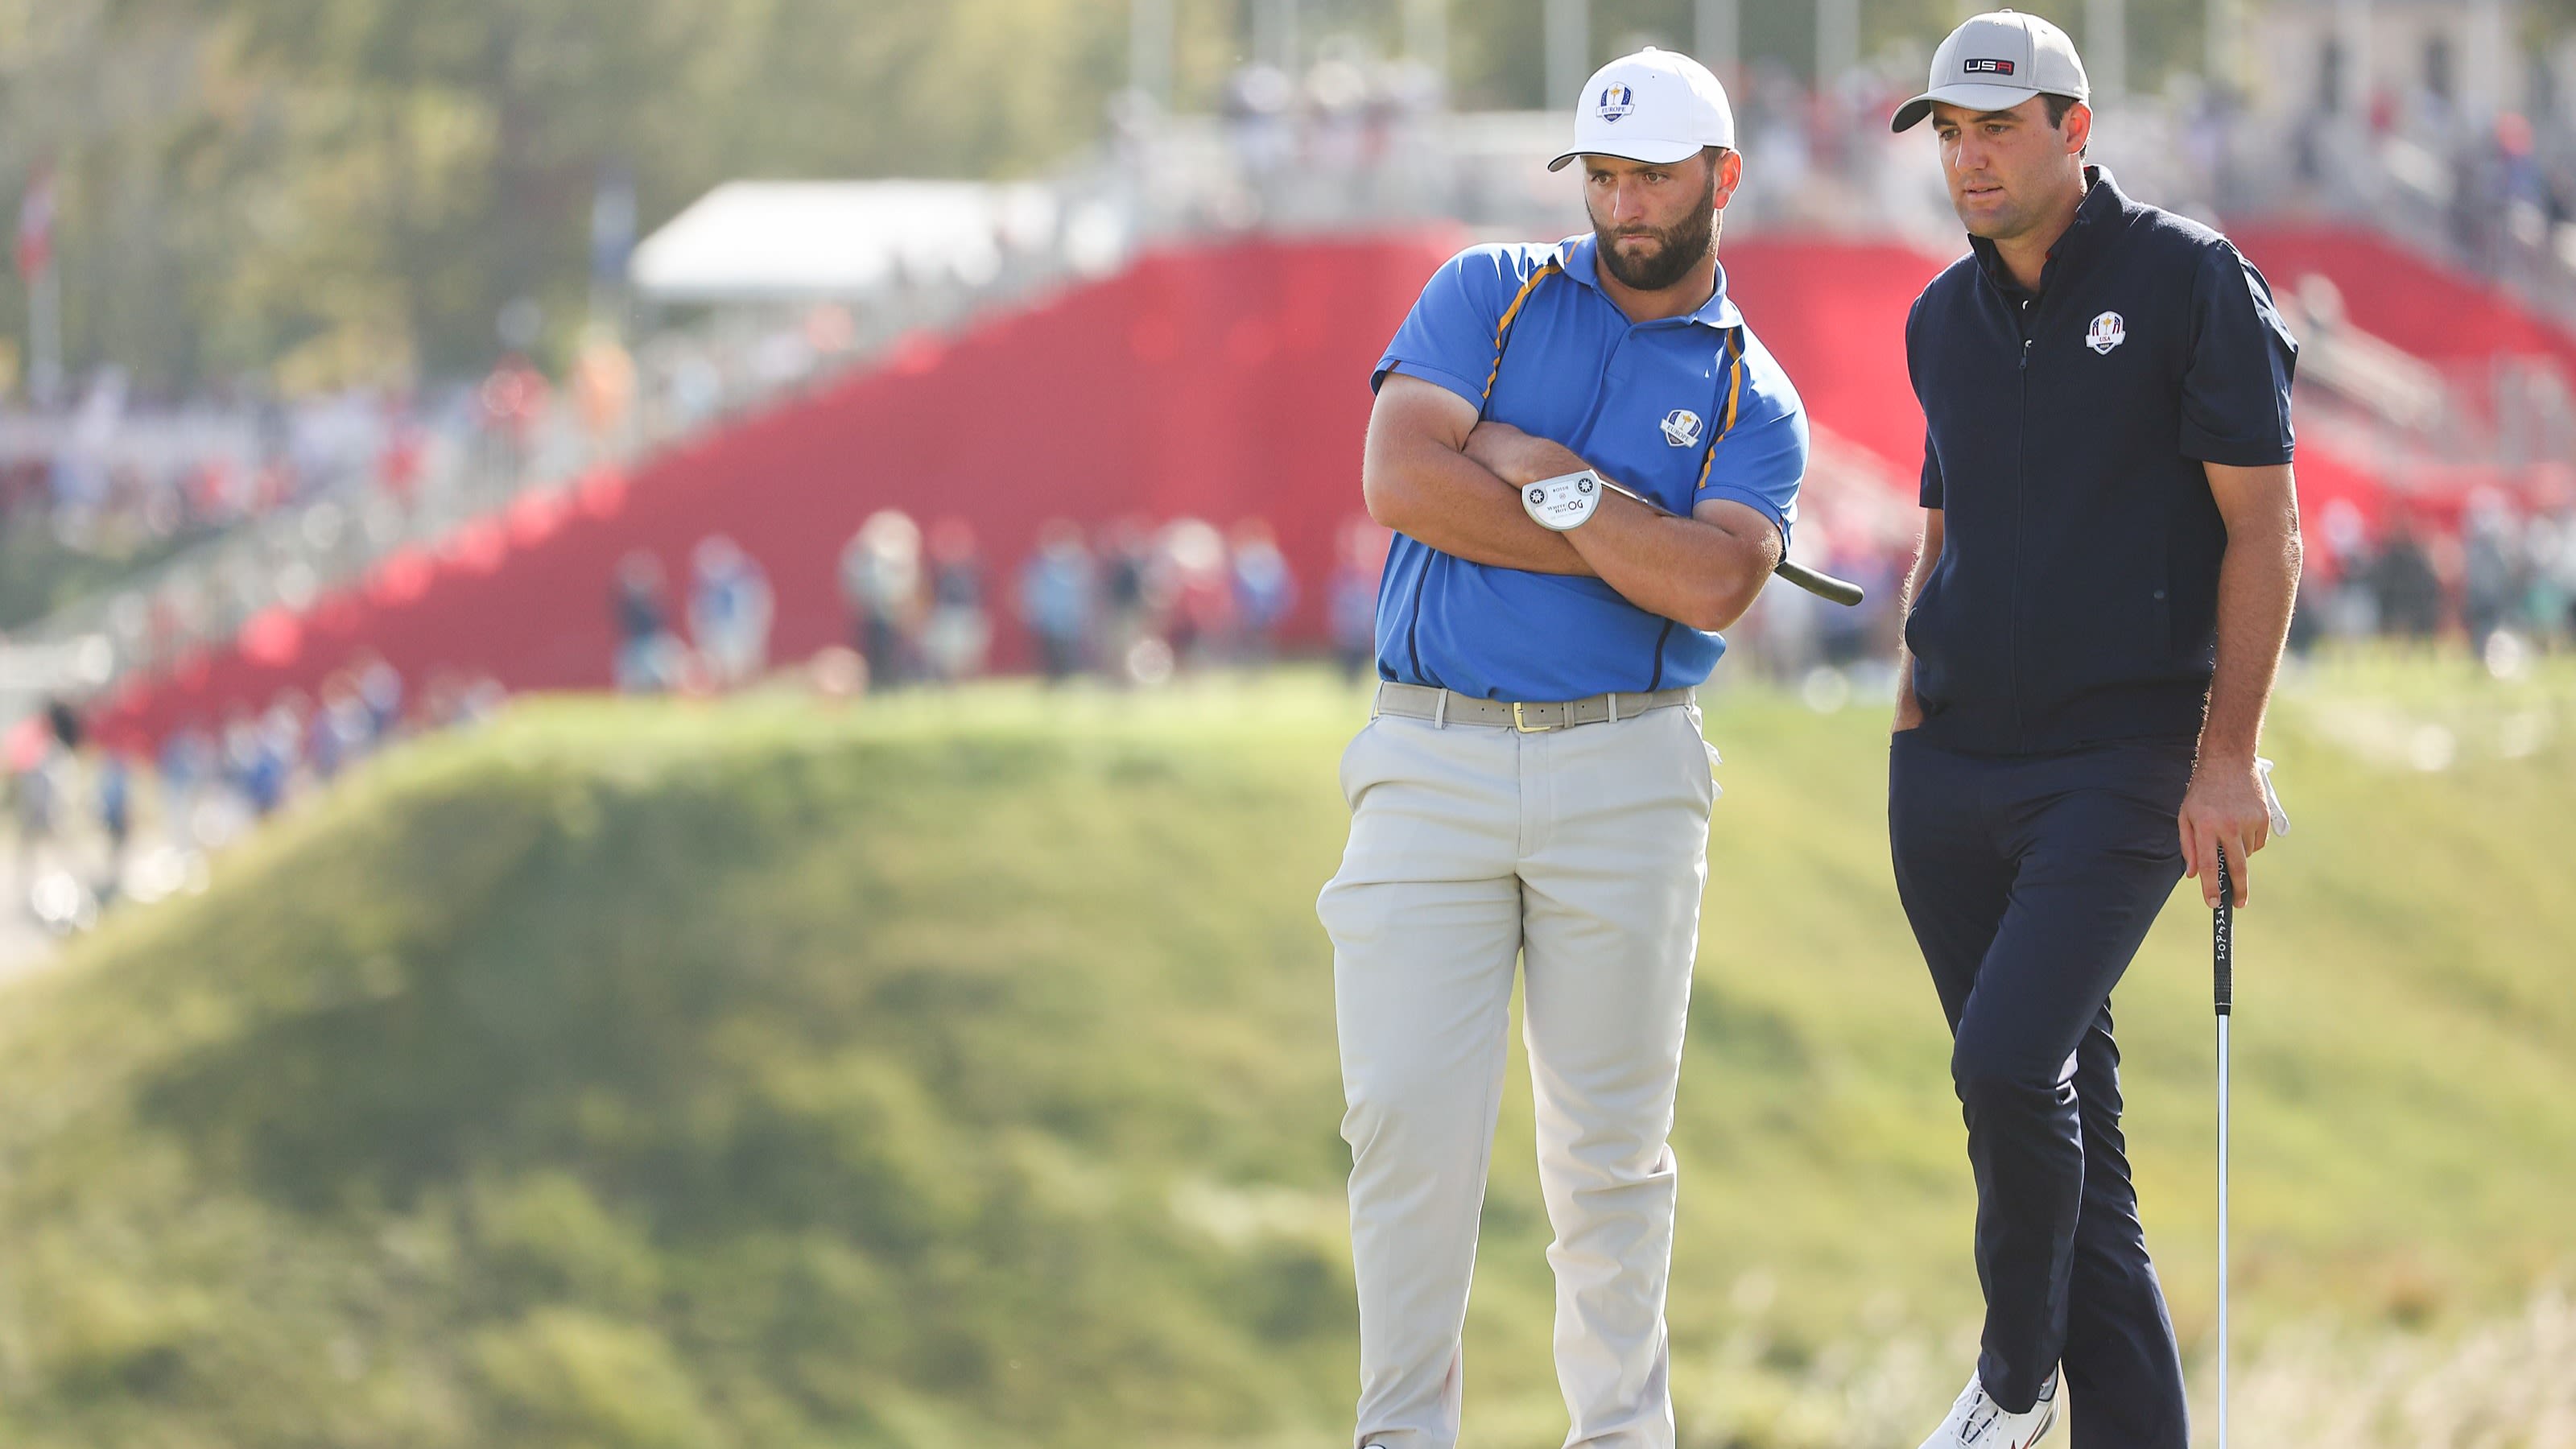 Jon Rahm and Scottie Scheffler during the 2020 Ryder Cup at Whistling Straits  in Kohler, Wisconsin. (Photo by Maddie Meyer/PGA of America)